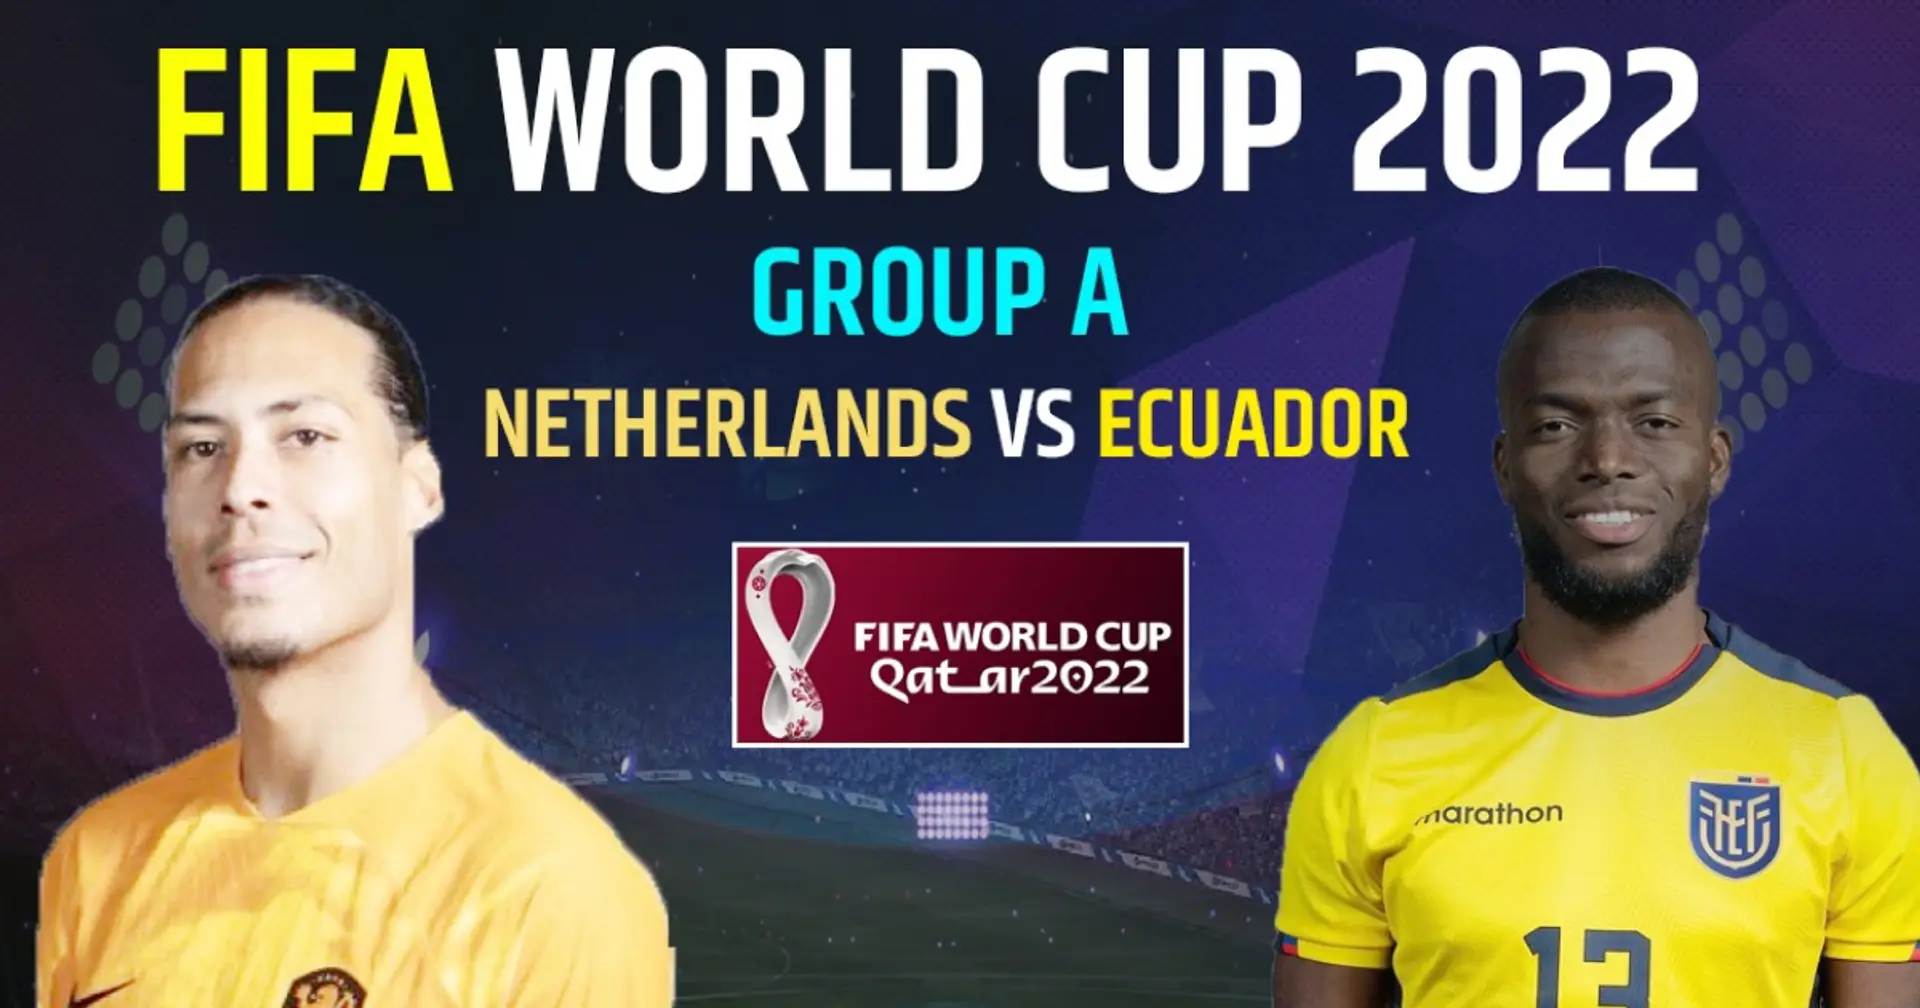 Netherlands vs Ecuador: Official team lineups for the World Cup clash revealed